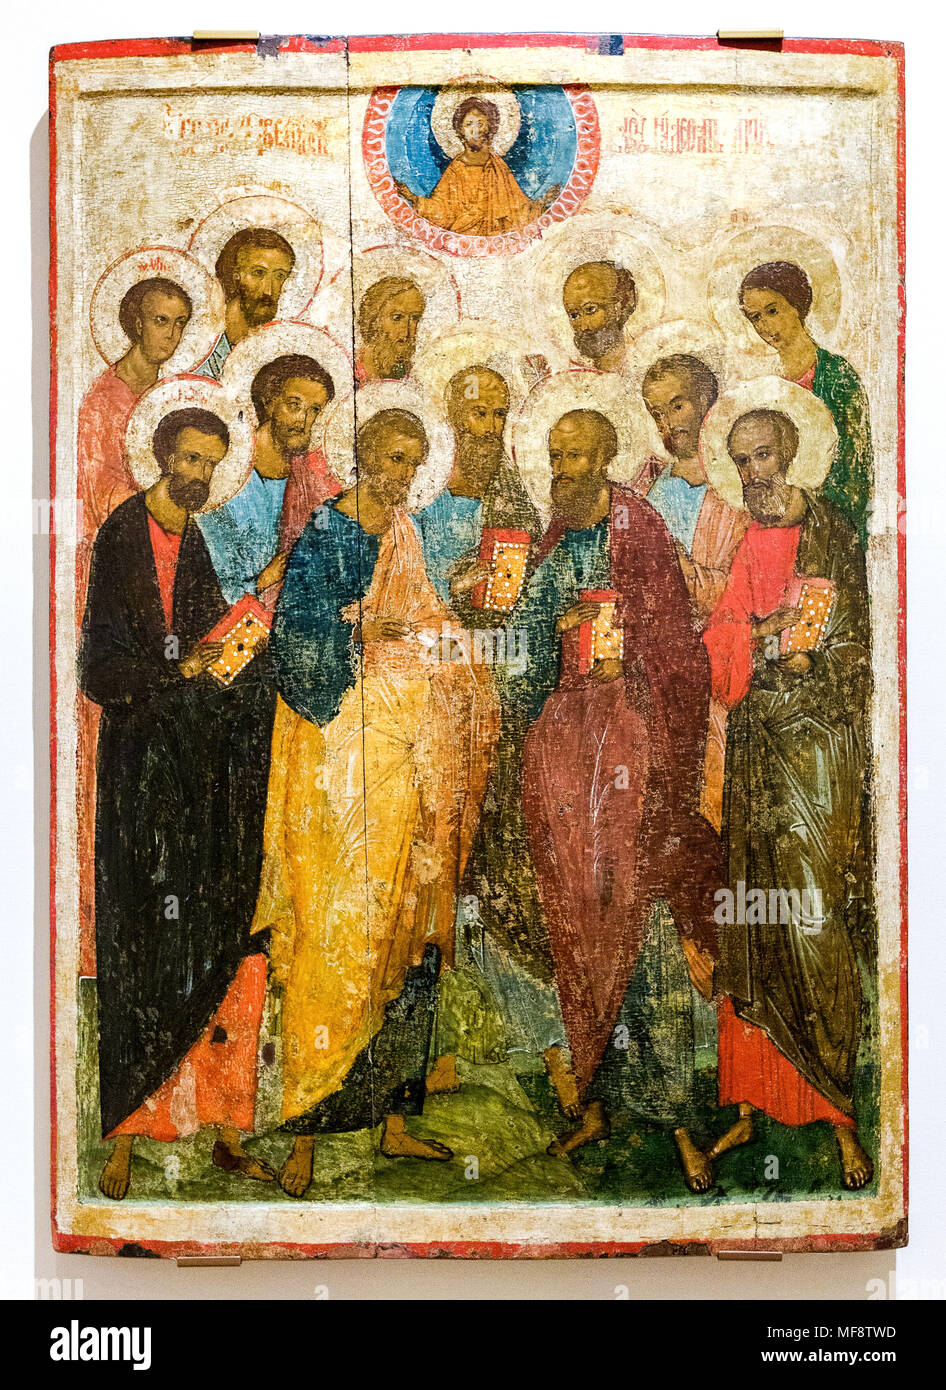 Veliky Novgorod, Russia - August 17, 2017: Antique Russian orthodox icon. The Council of the Twelve Apostles, 1432 Stock Photo